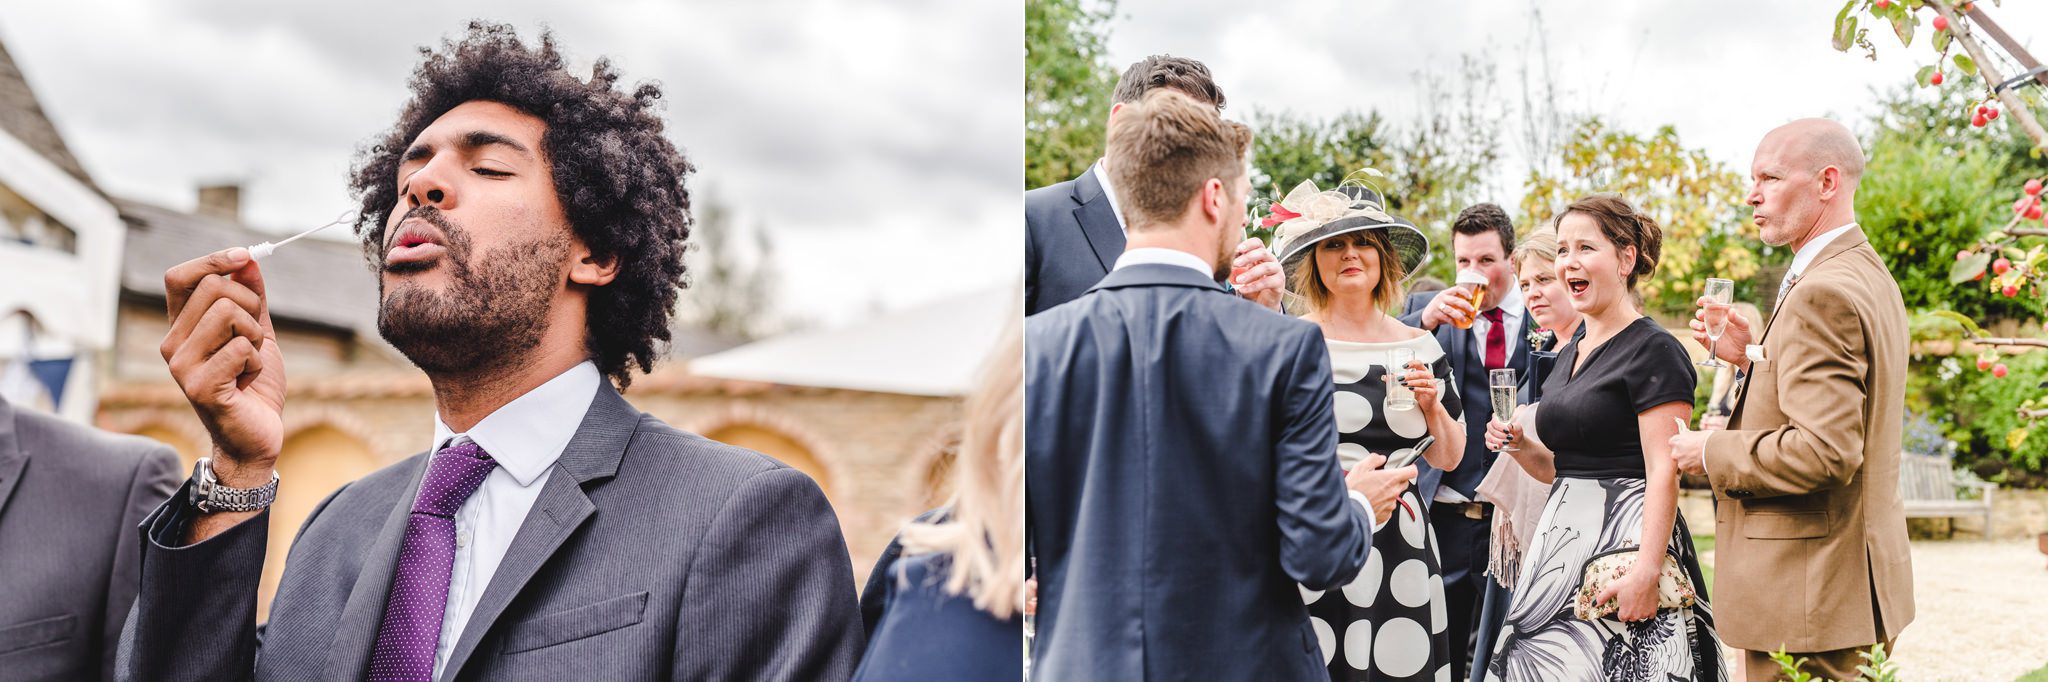 Candid wedding photography of guests at Oxleaze Barn by Bigeye Photography